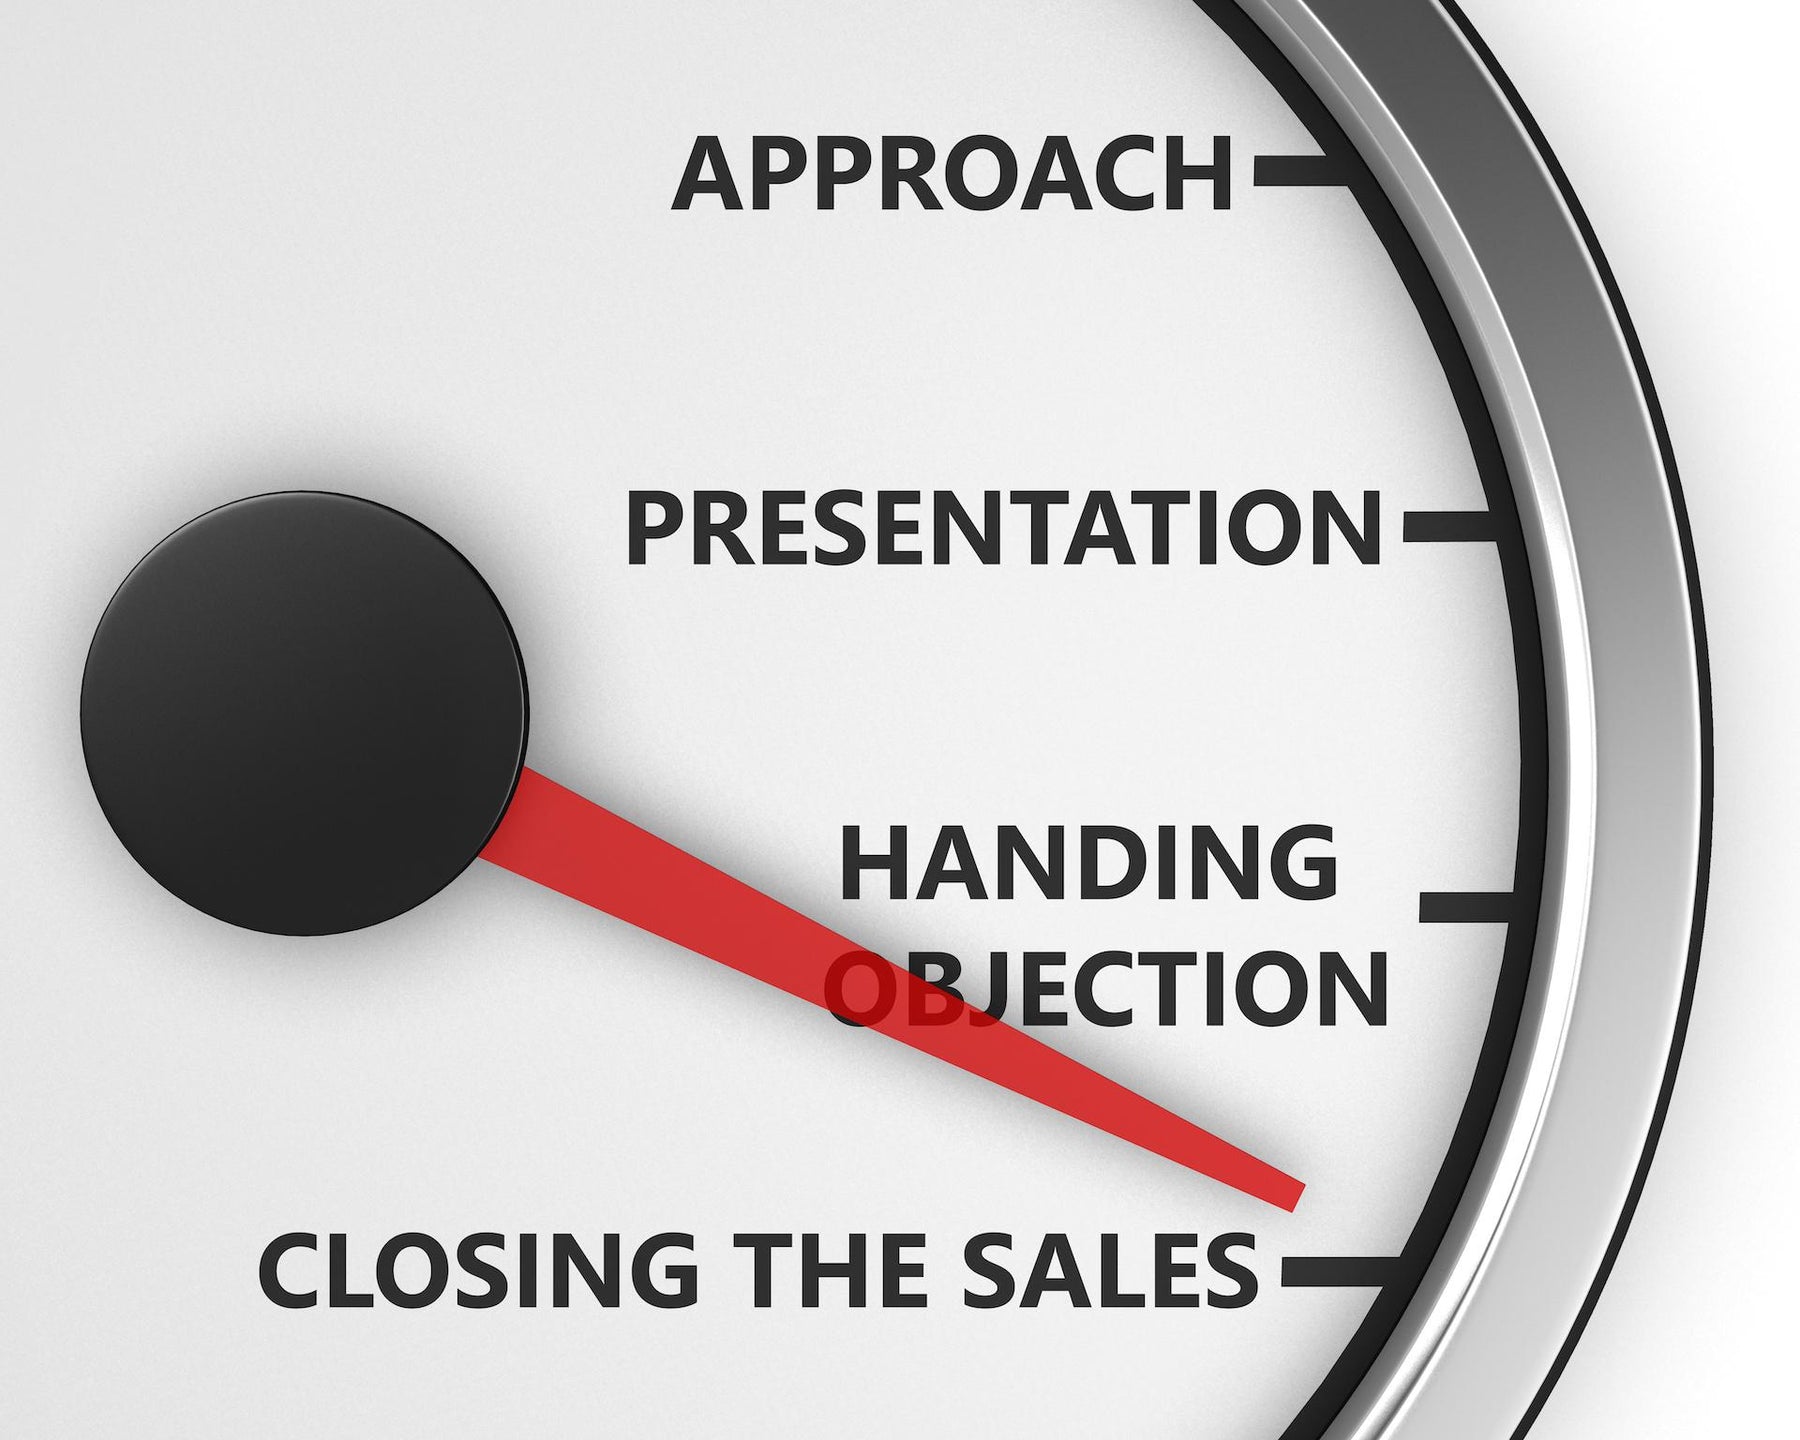 Closing sales on your exhibition stand